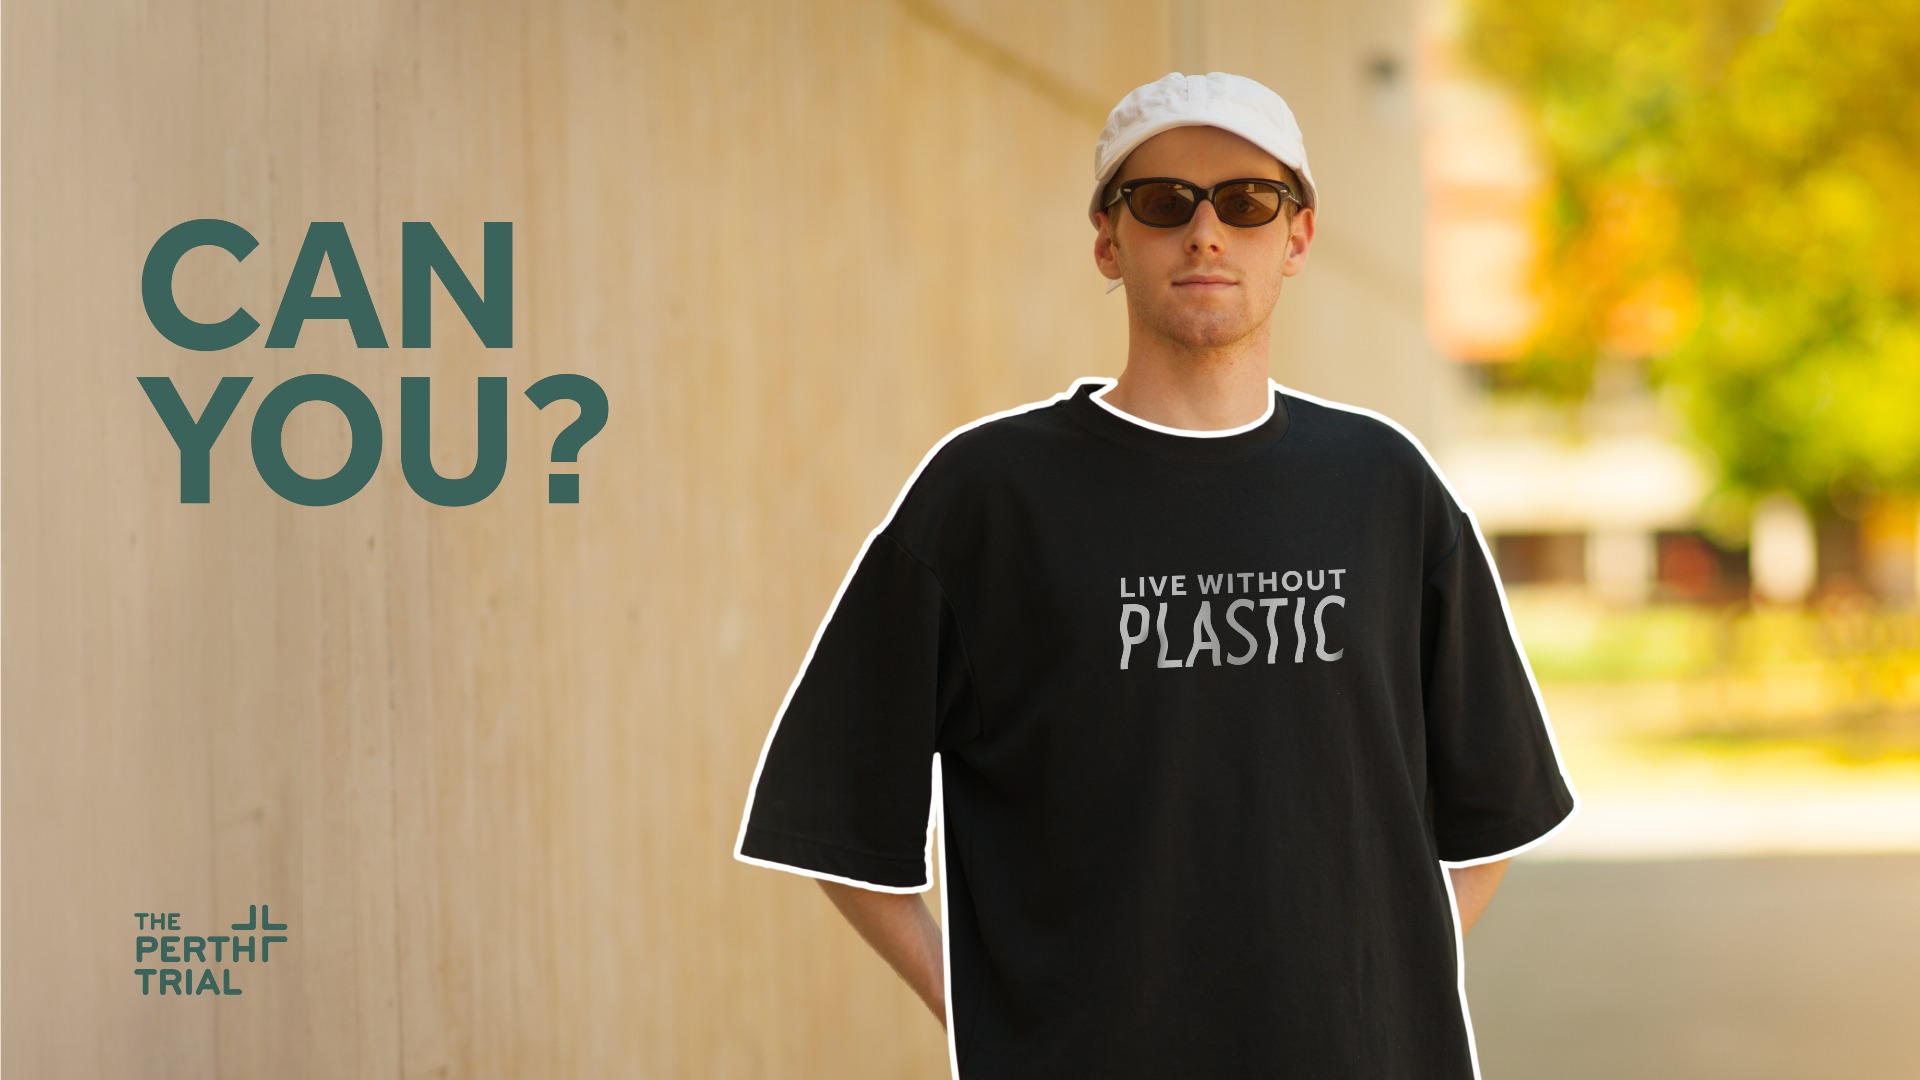 Man standing in front of wall wearing a black t-shirt that says 'live without plastic'